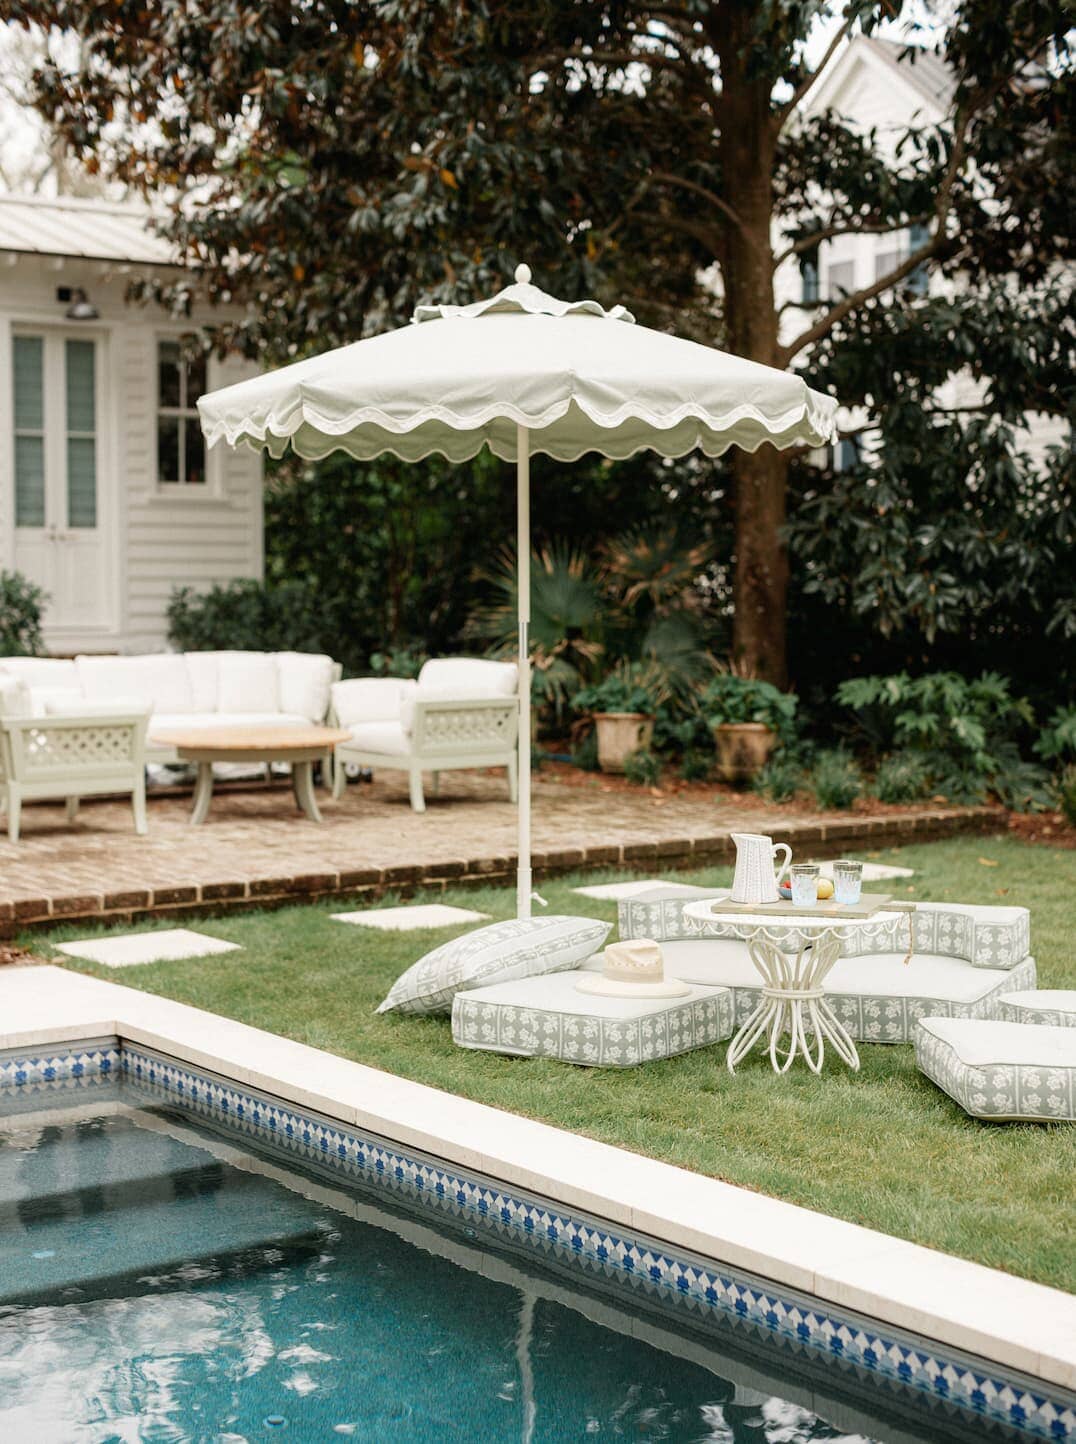 Outdoor pool area with umbrellas, chairs and outdoor cushions. 